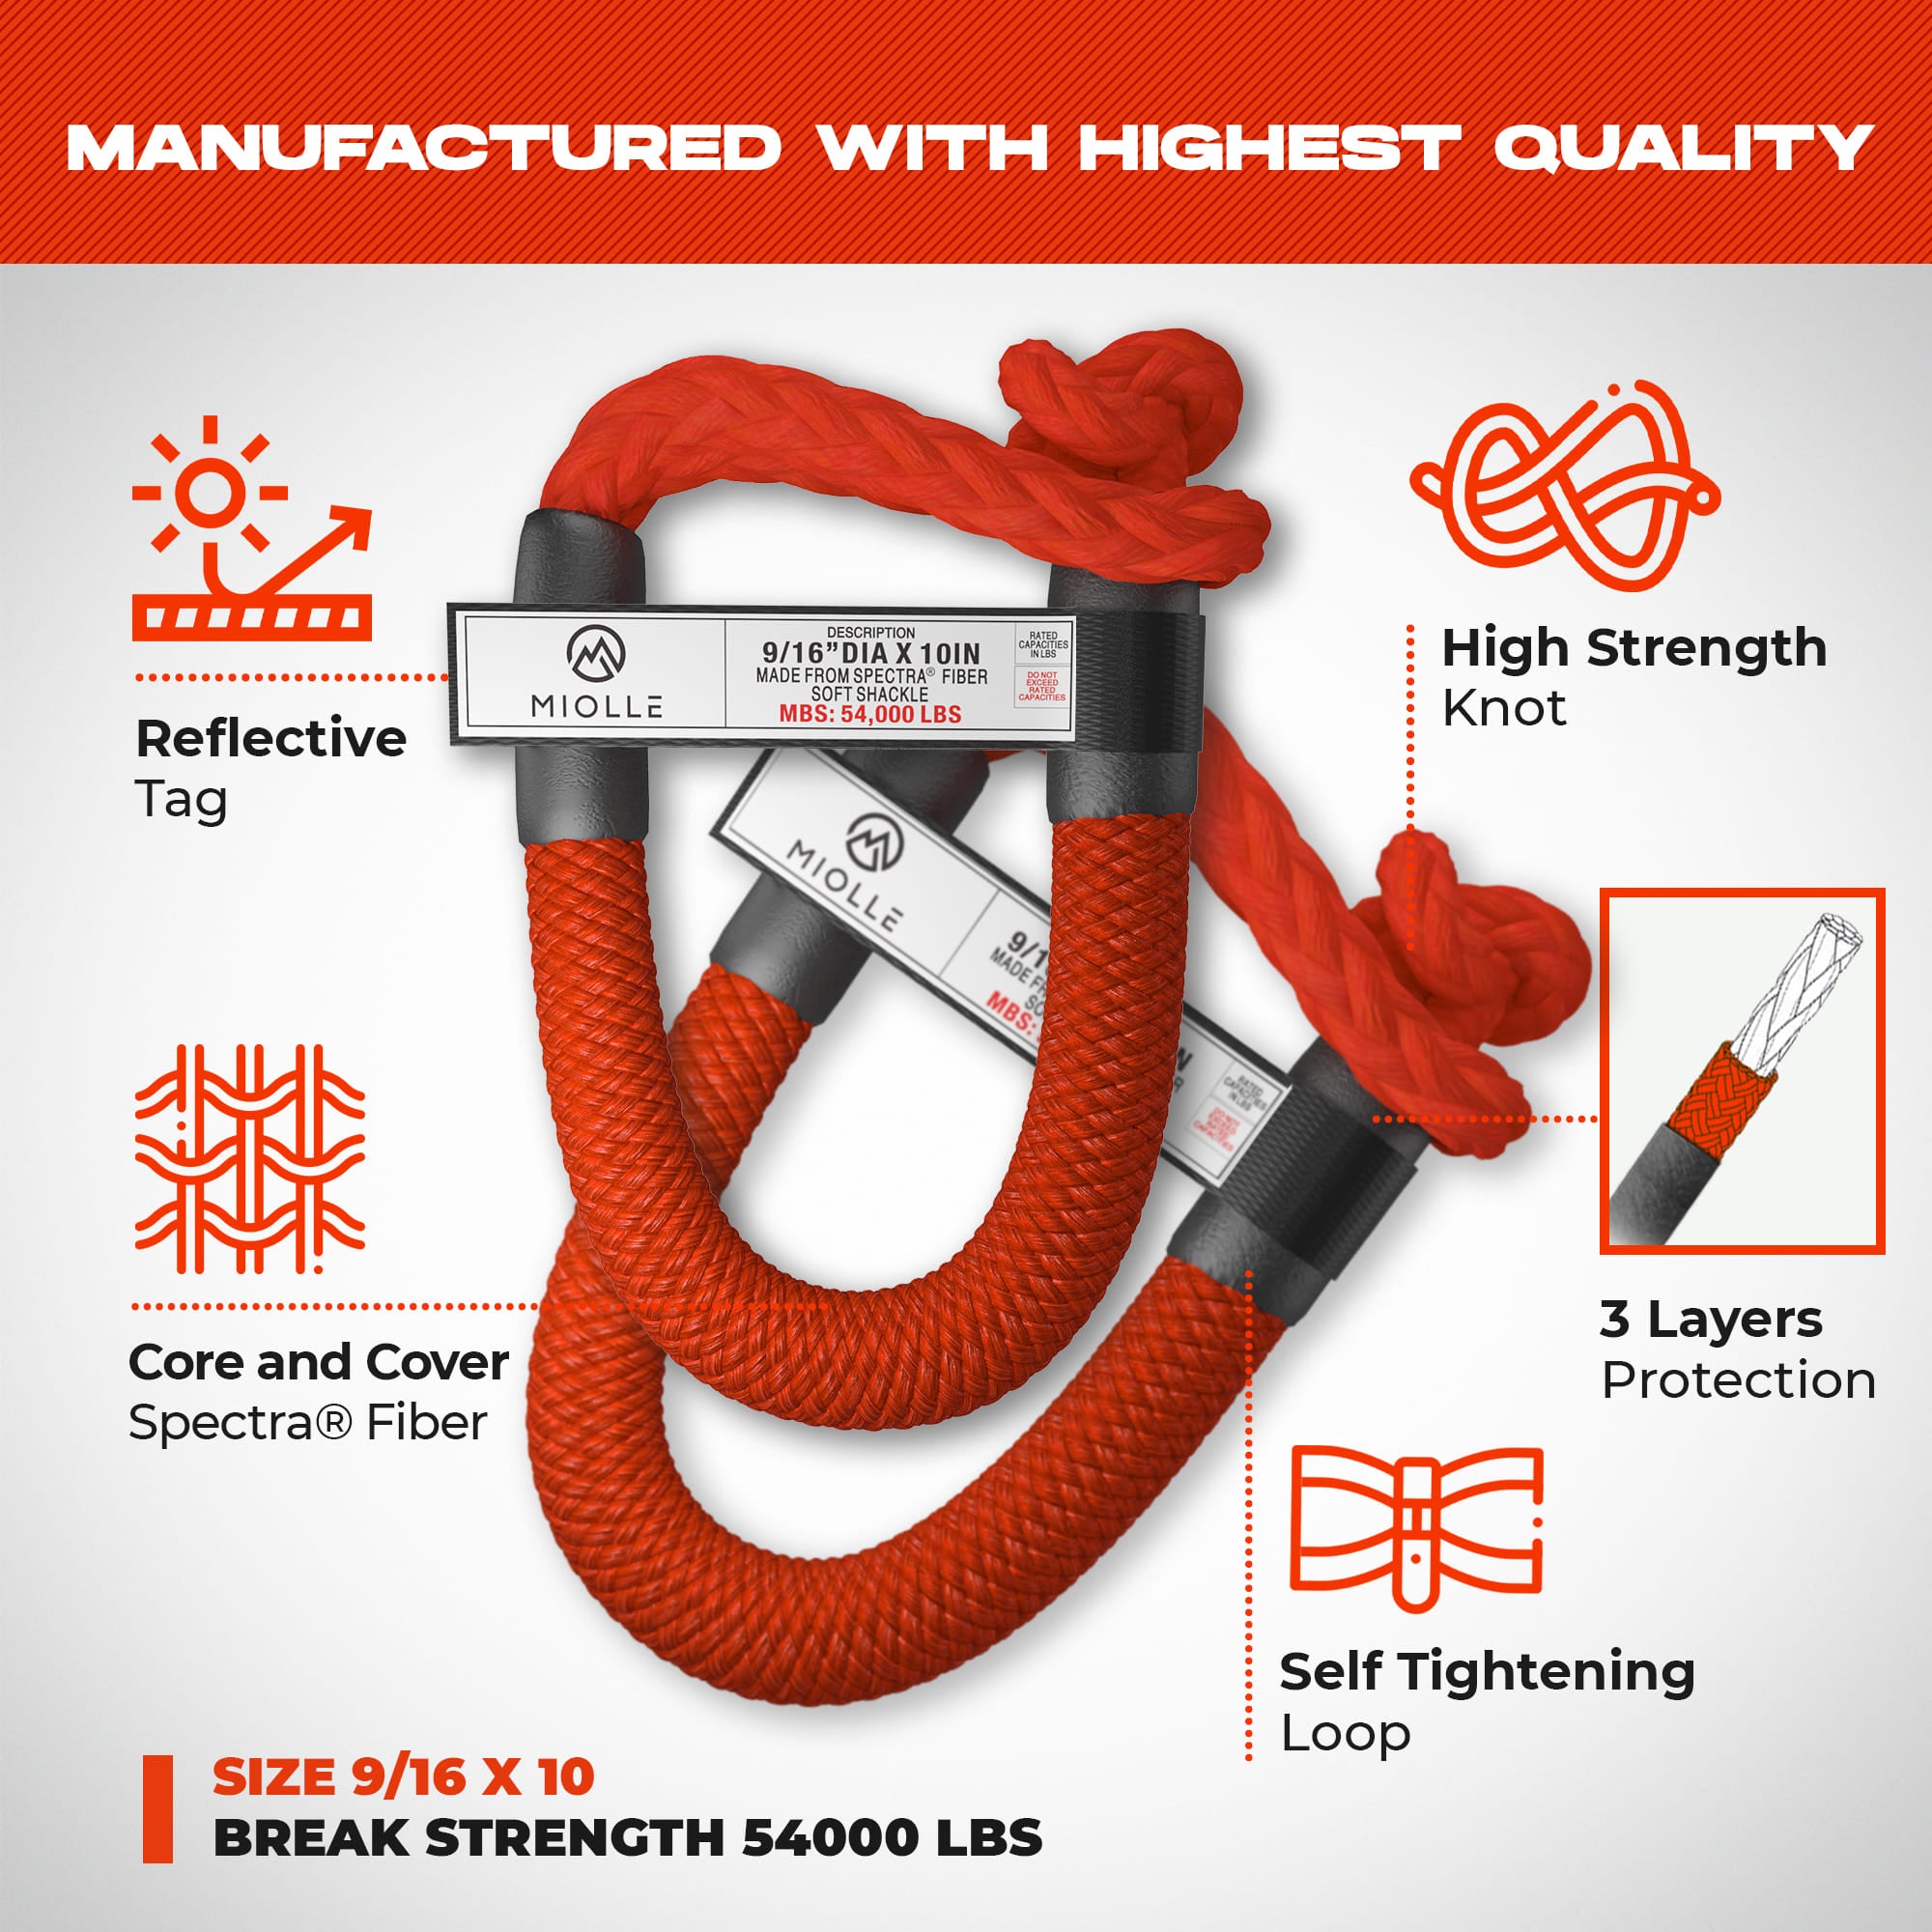 High Performance Rope, Special Fiber